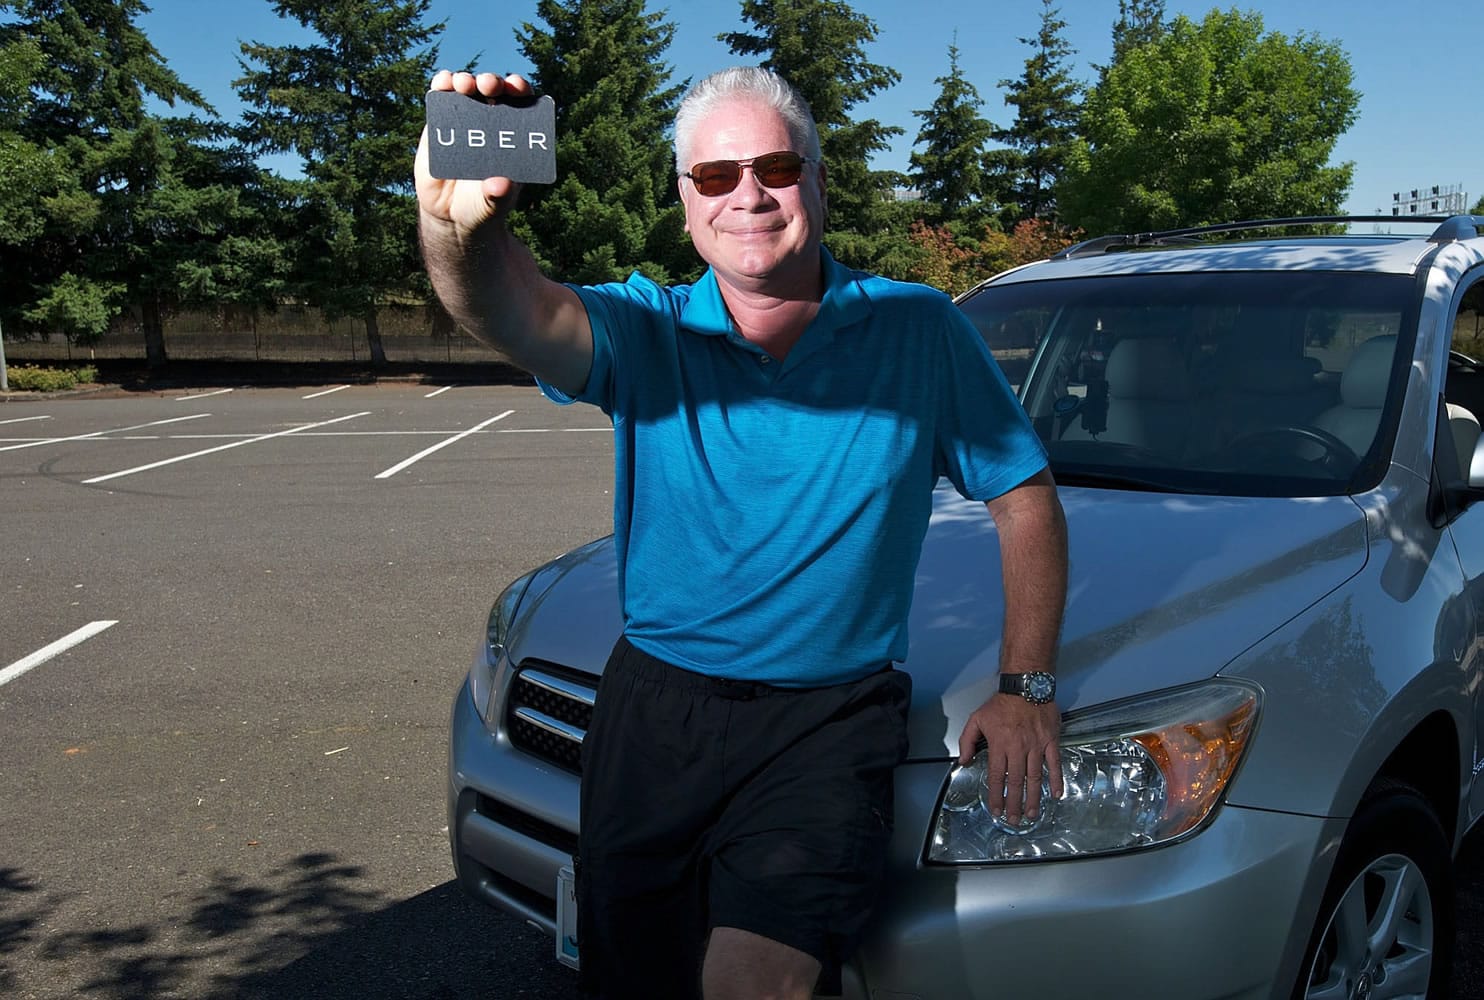 Uber driver Eric Hansen of Vancouver is one of the first drivers for Uber Vancouver, a ride-sharing system recently launched in the city.